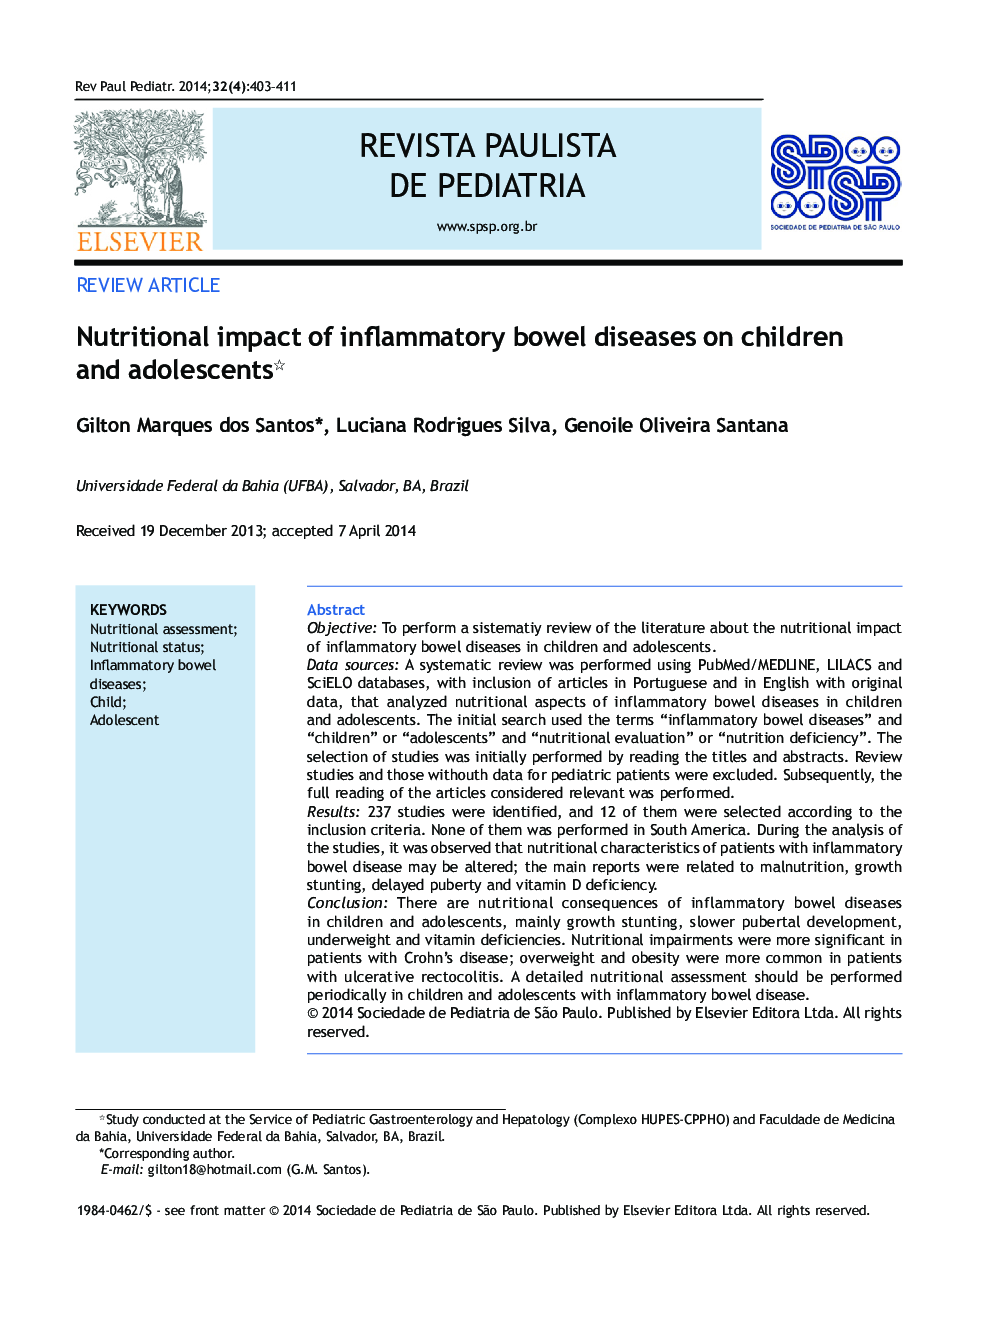 Nutritional impact of inflammatory bowel diseases on children and adolescents*